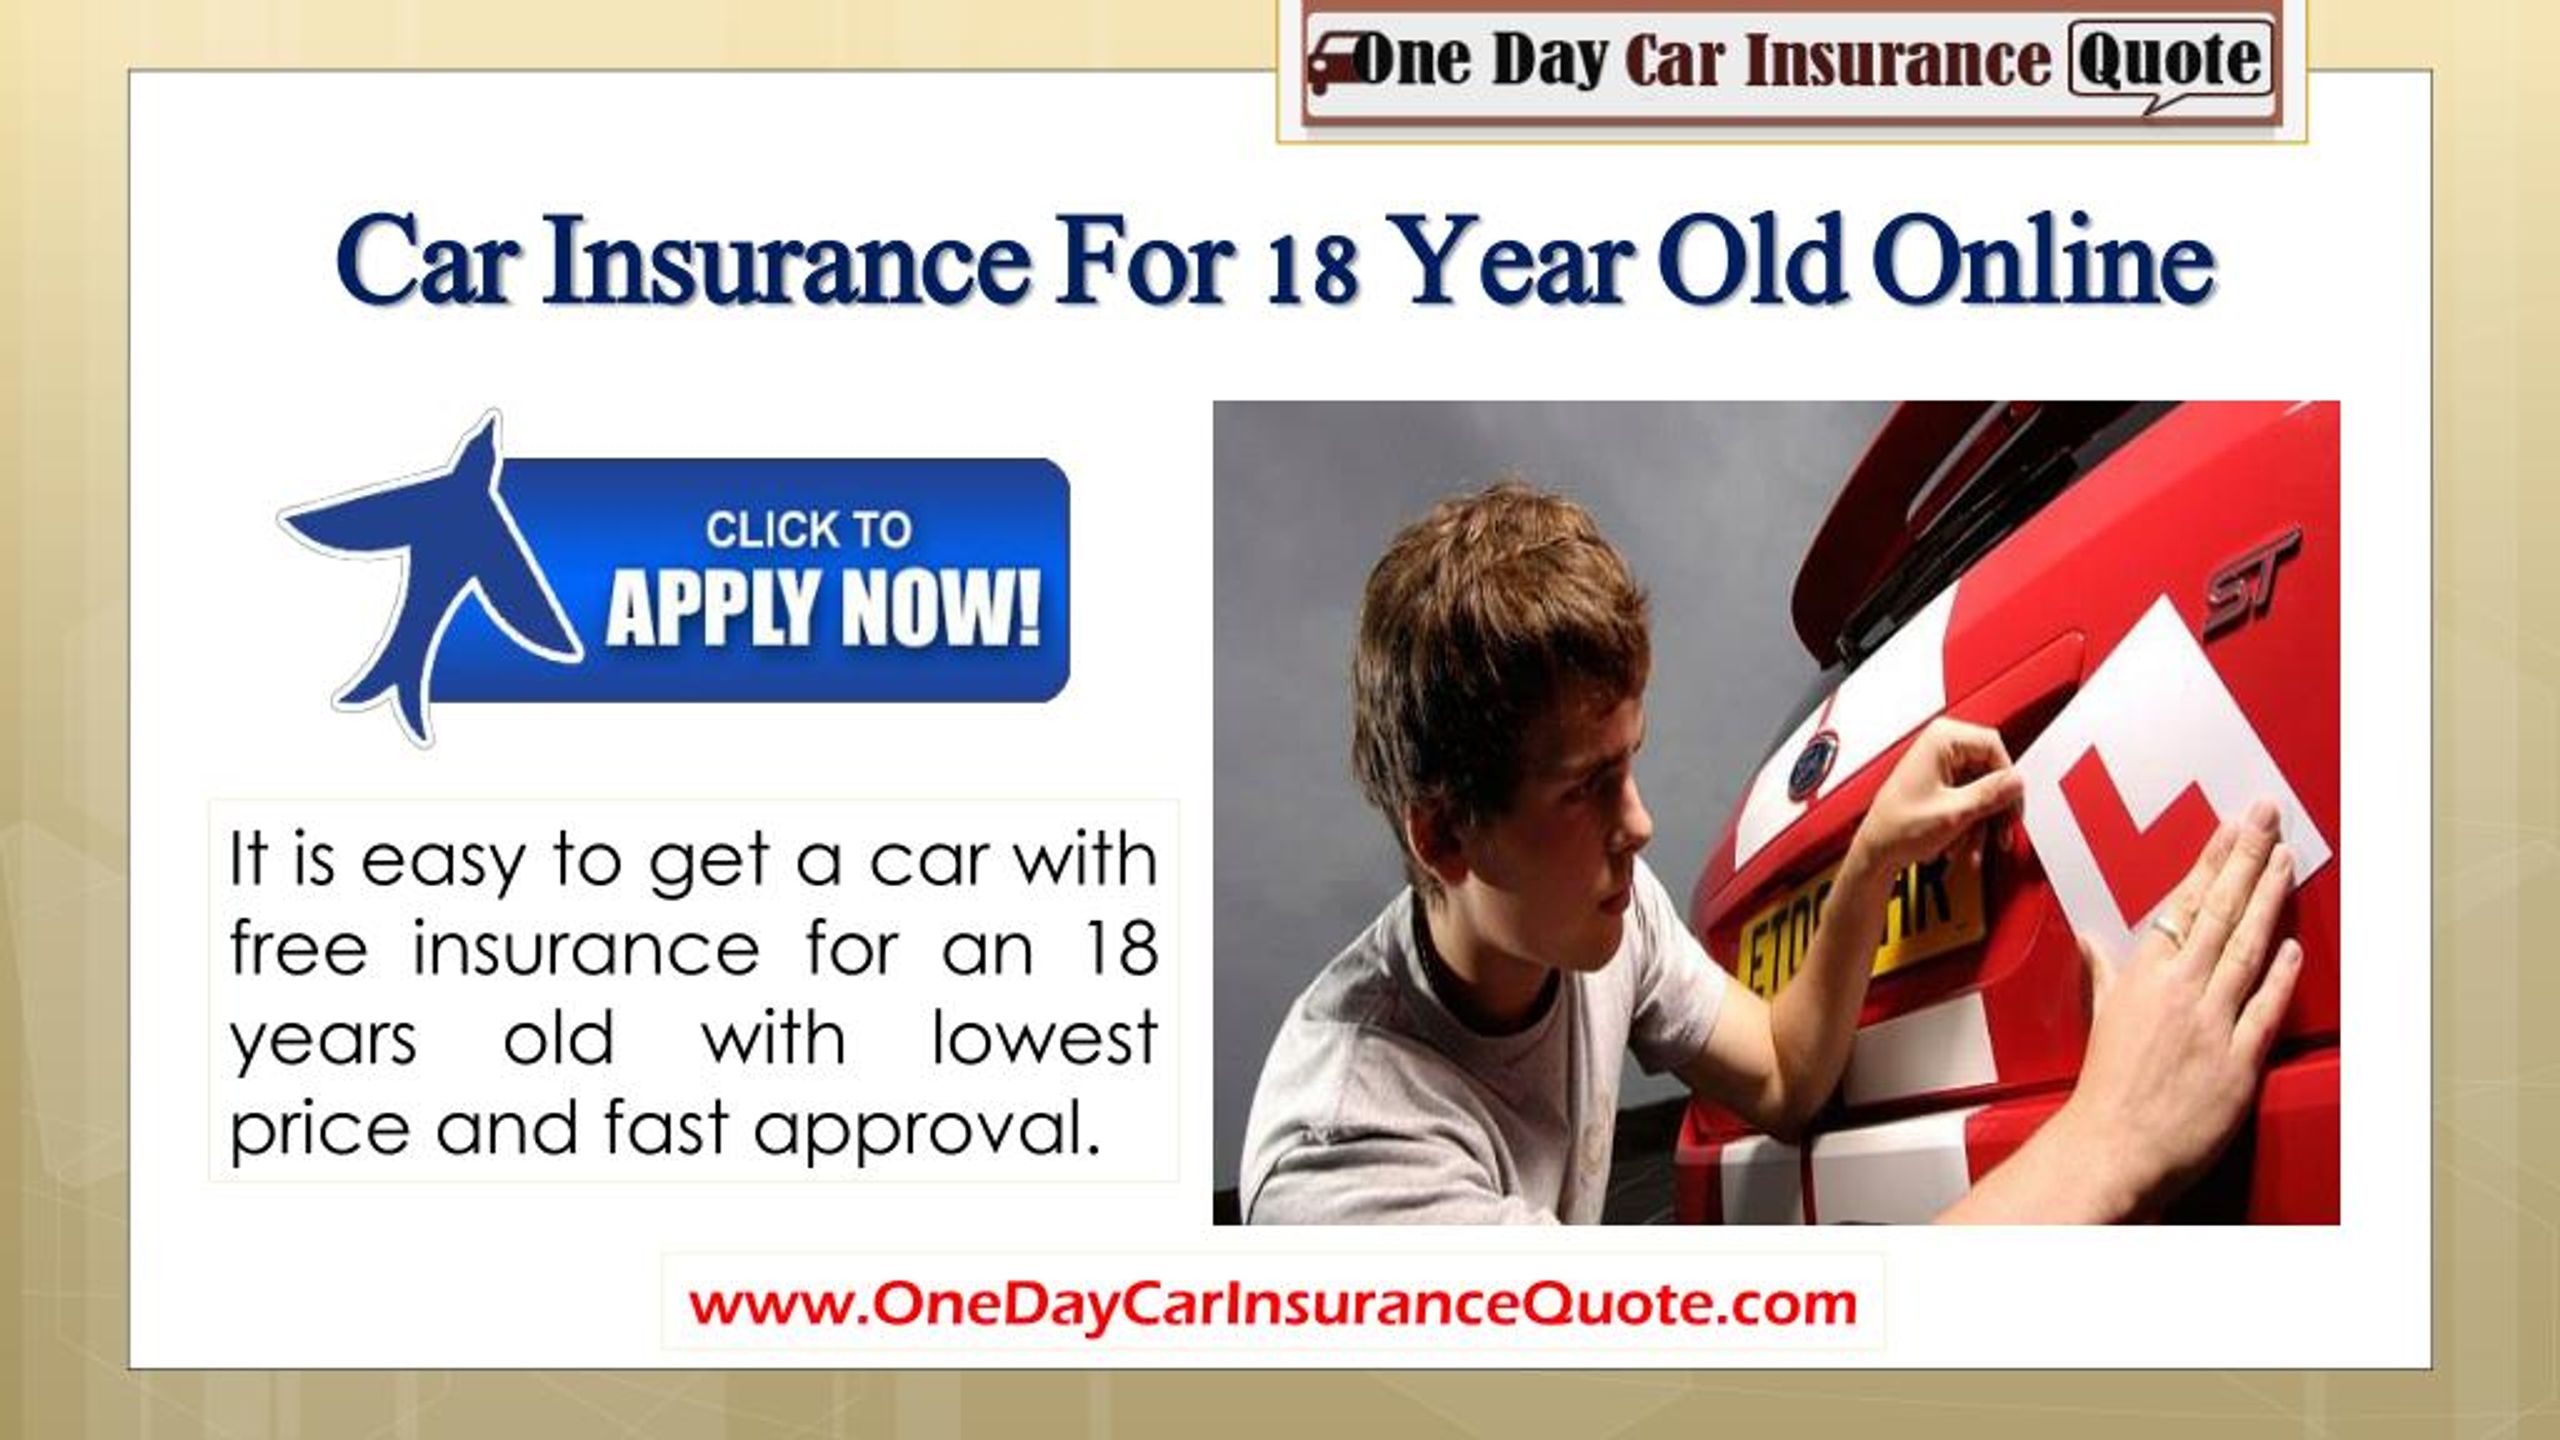 Car Insurance For 18 Year Old Price